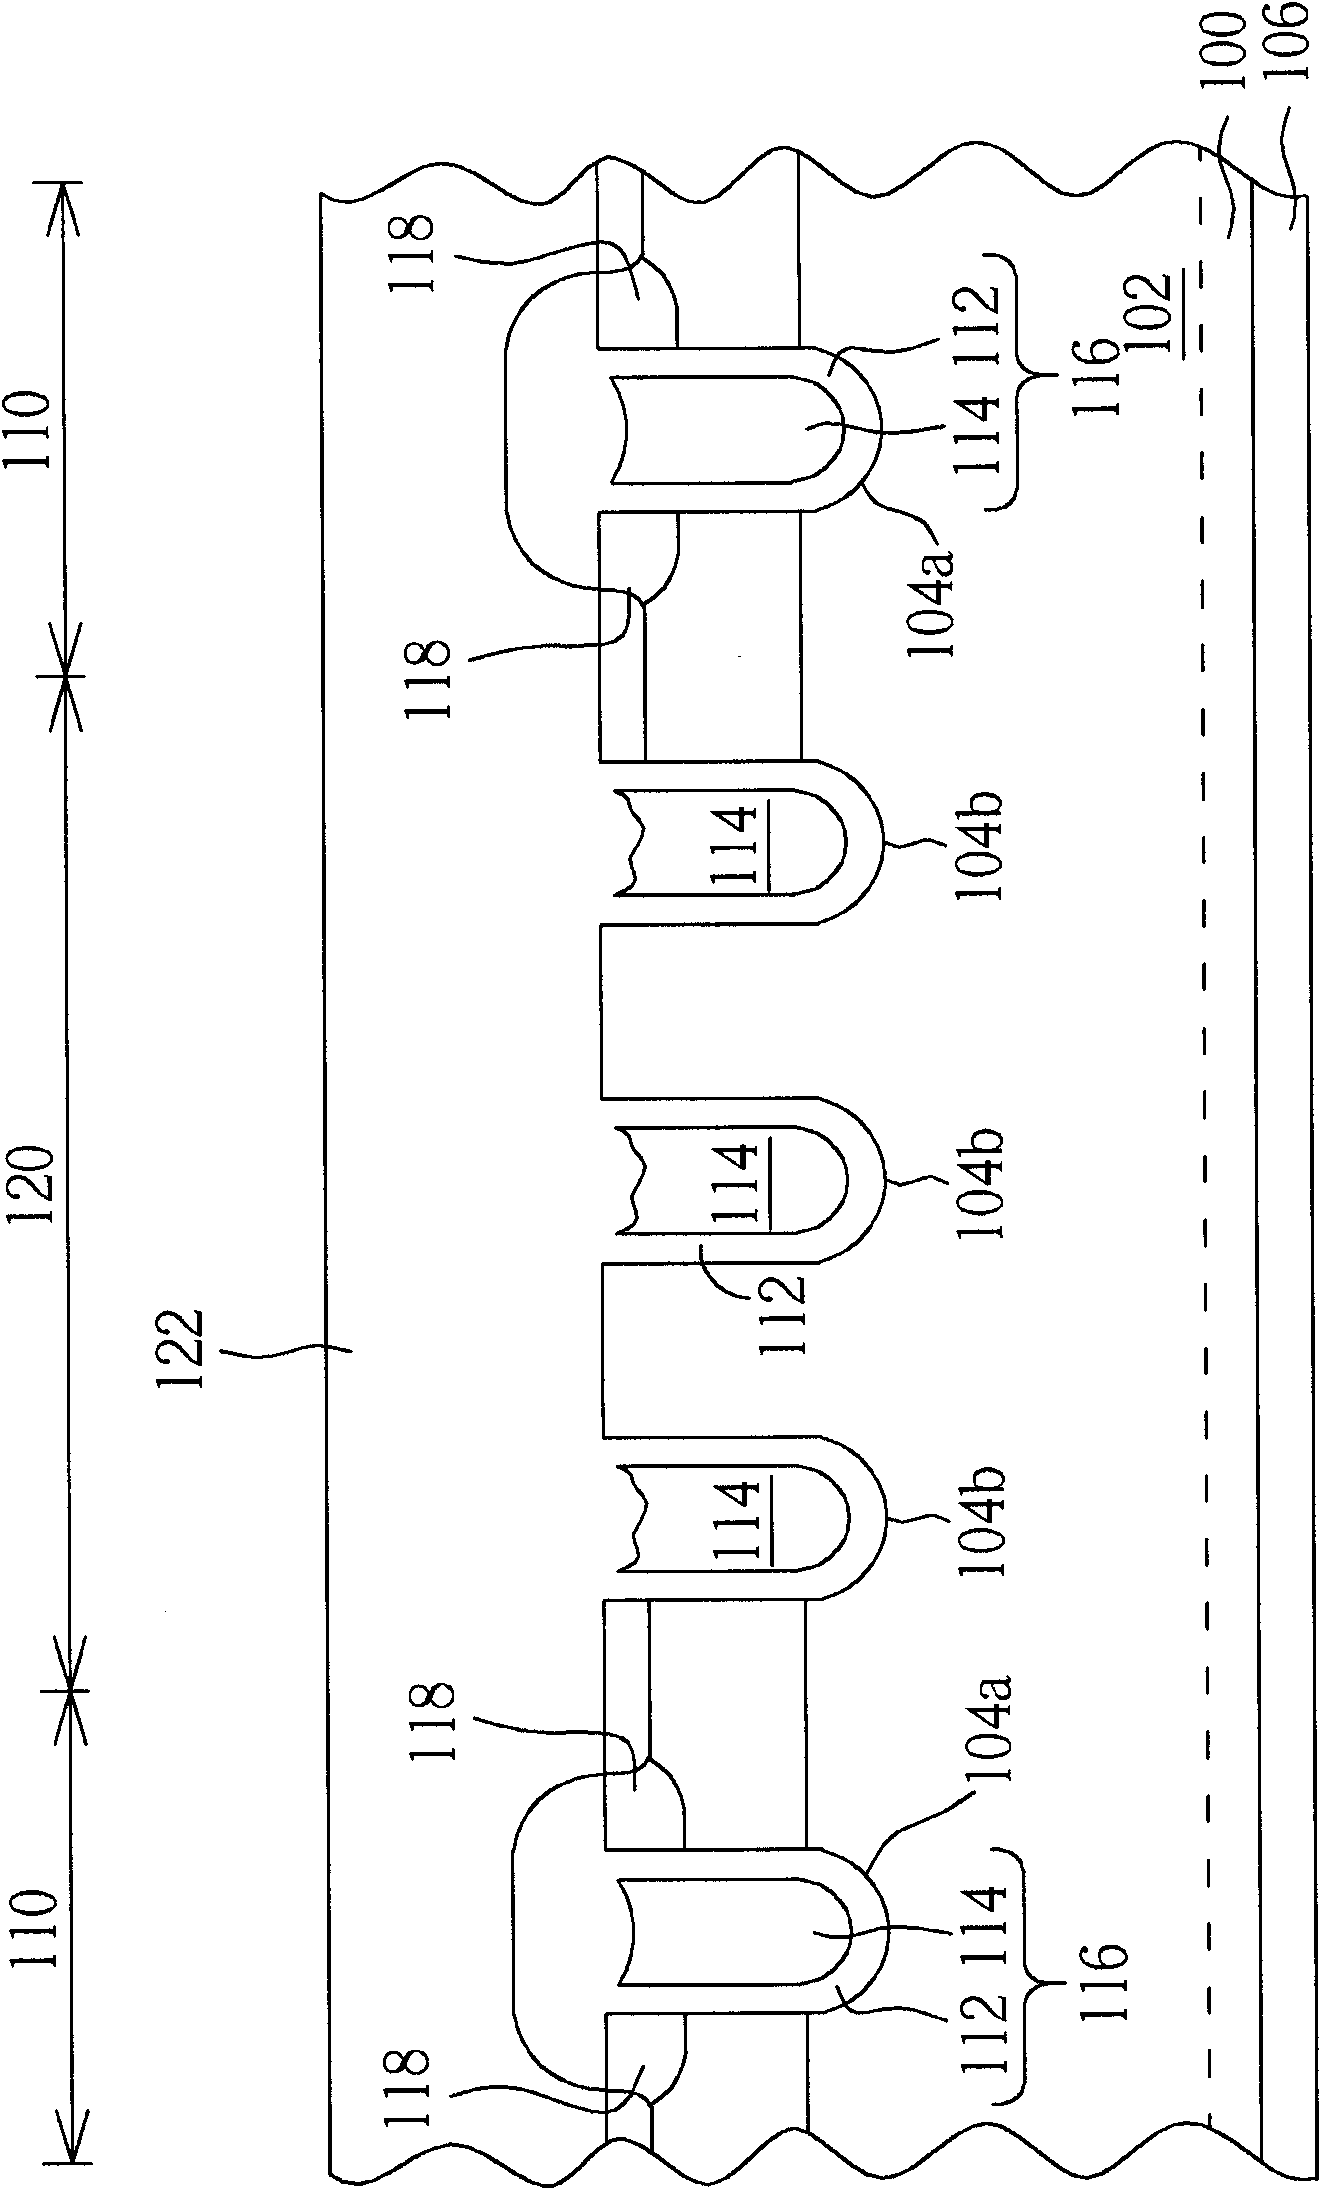 Integration of metal-oxide-semiconductor field-effect transistor (MOSFET) and Schottky diode and method for manufacturing same